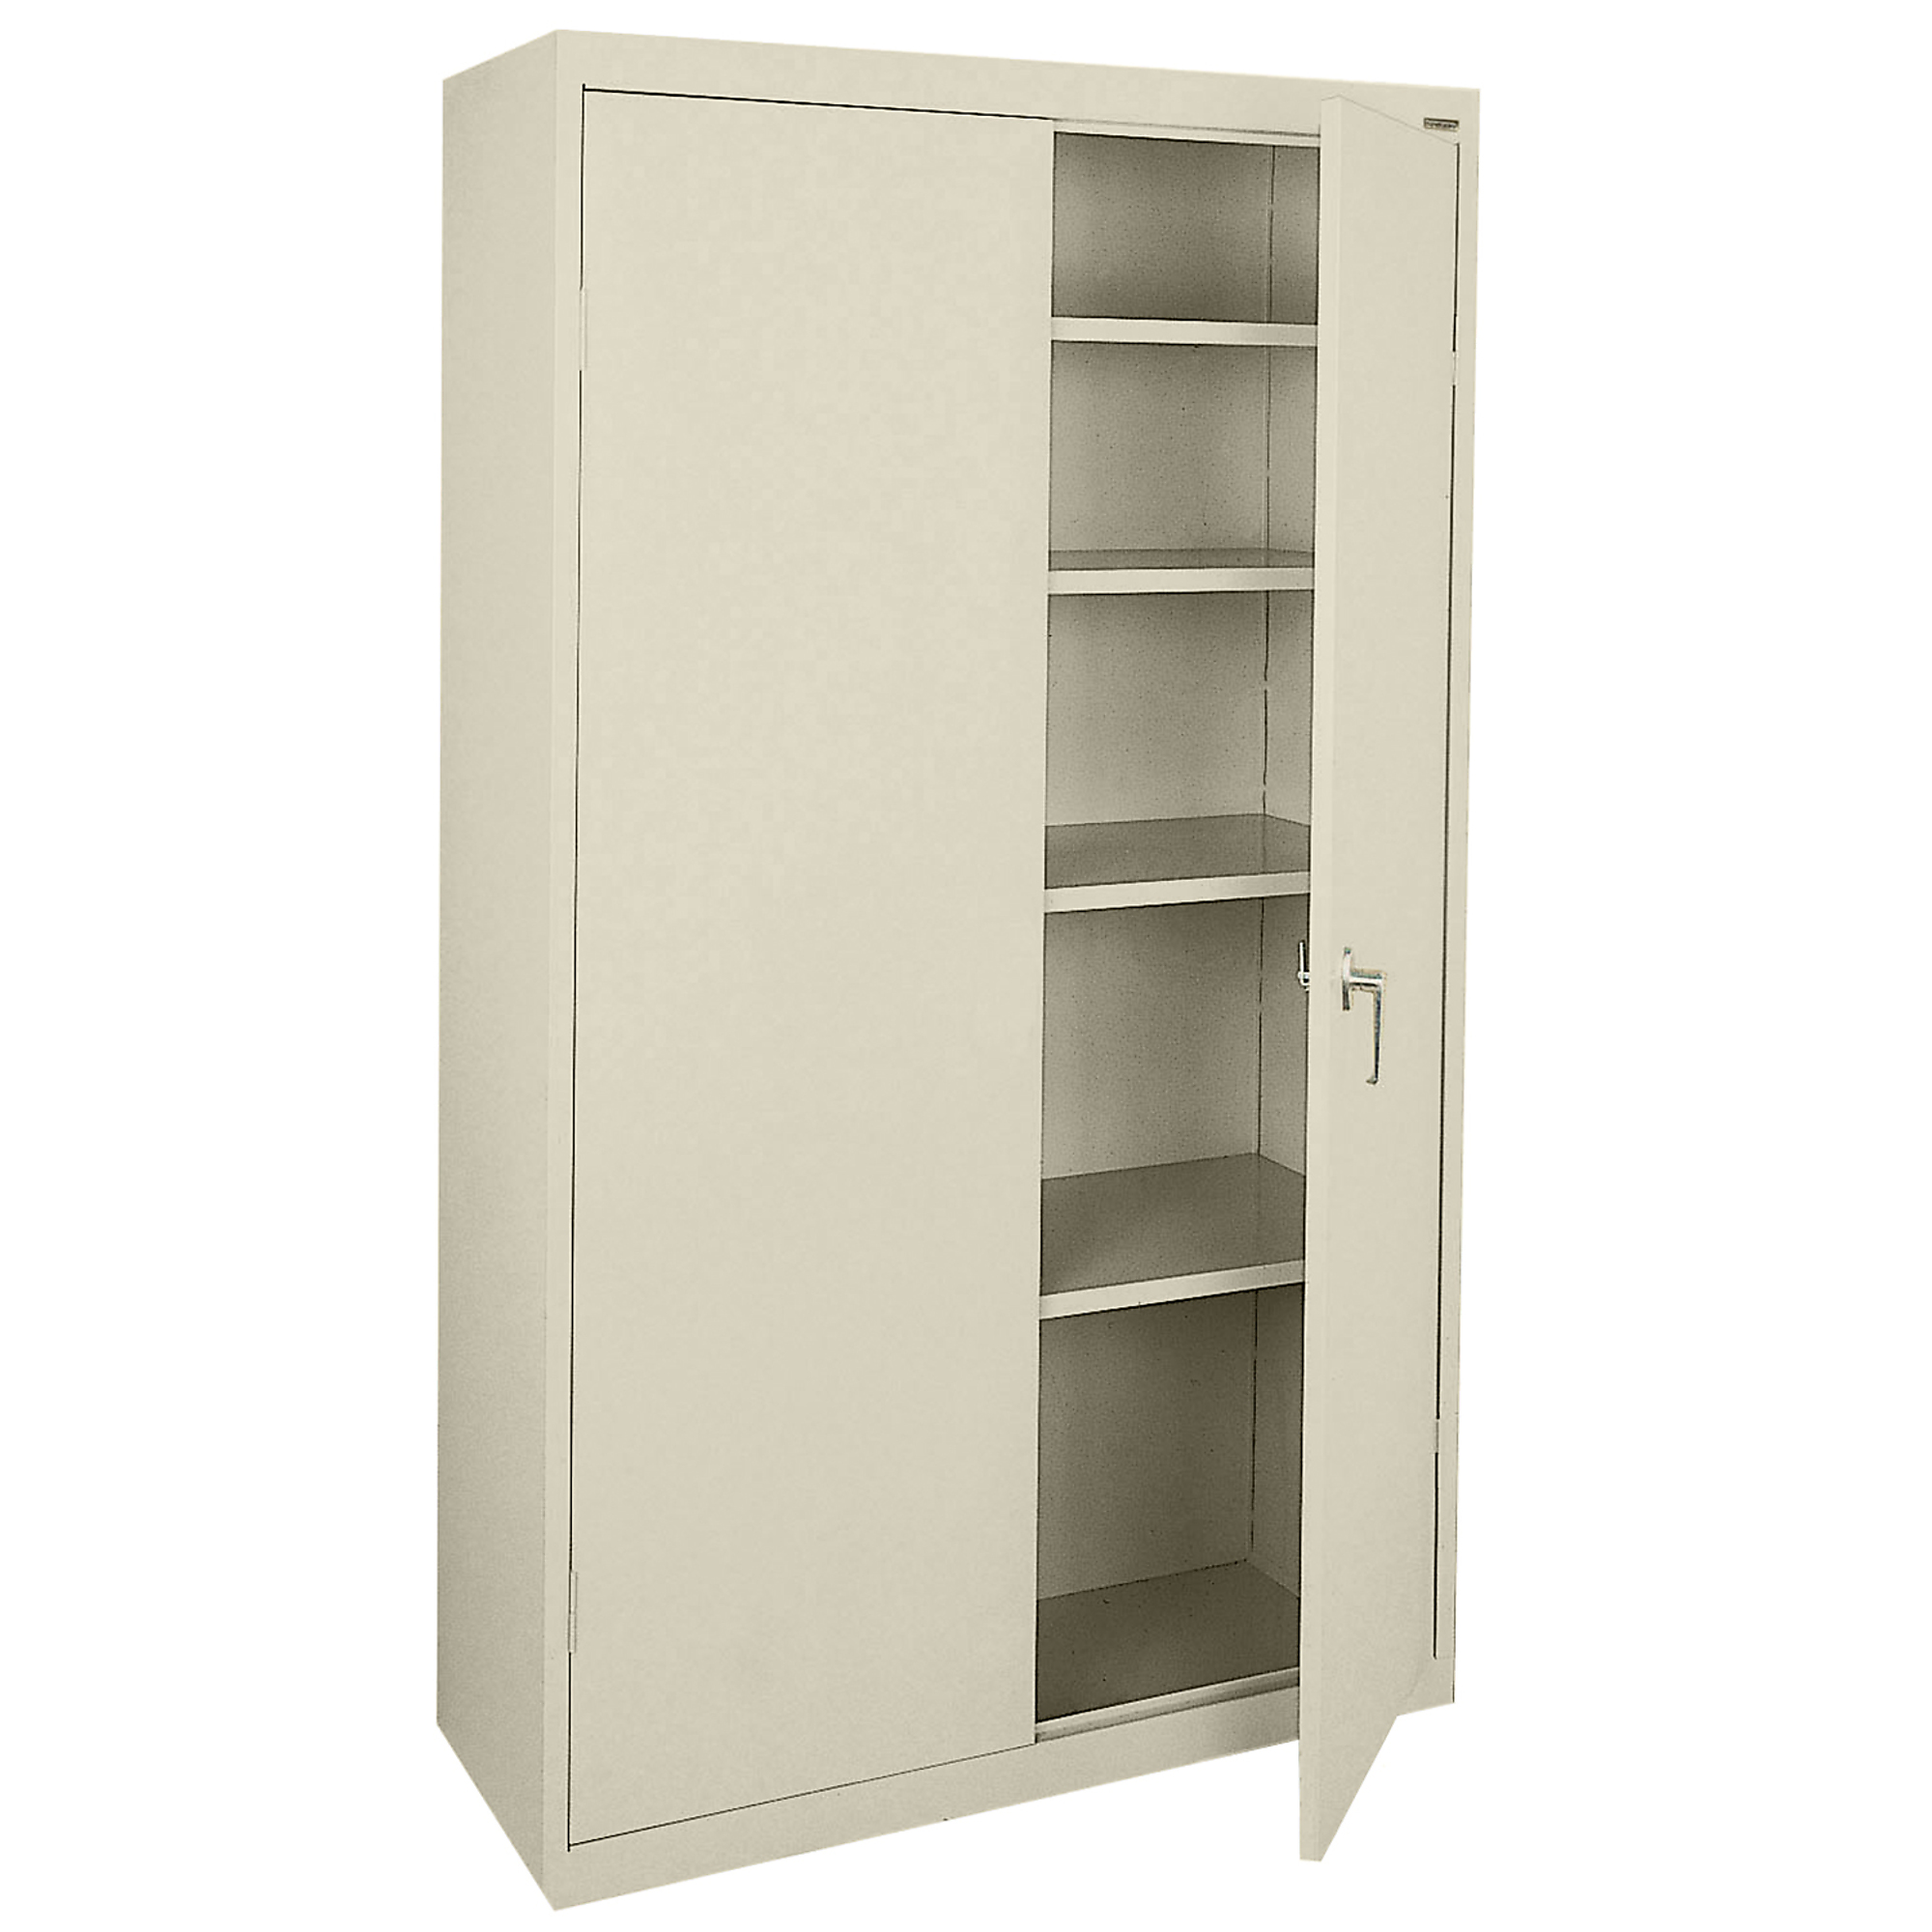 Sandusky, Value Line Cabinet 36x18x72 Putty, Height 72 in, Width 36 in, Color Putty, Model - Sandusky Lee VF41361872-07